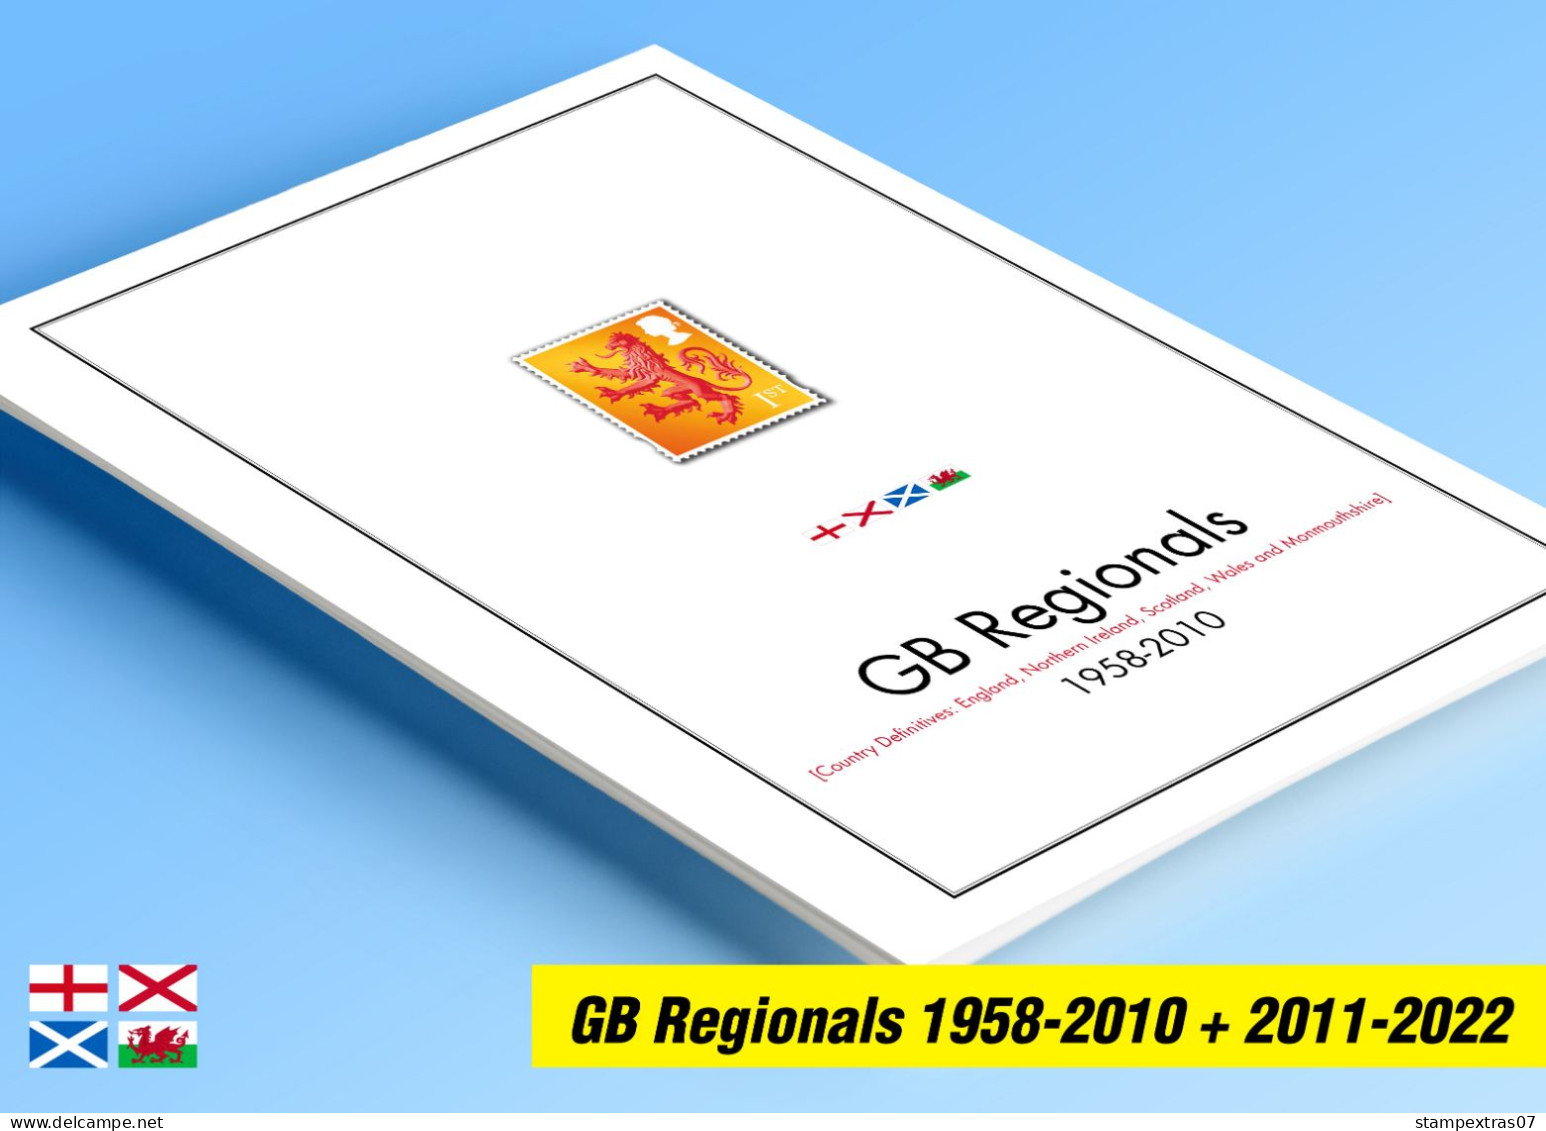 COLOR PRINTED GREAT BRITAIN REGIONALS [PICTORIALS] 1958-2022 STAMP ALBUM PAGES (40 Illustrated Pages) >> FEUILLES ALBUM - Pre-printed Pages